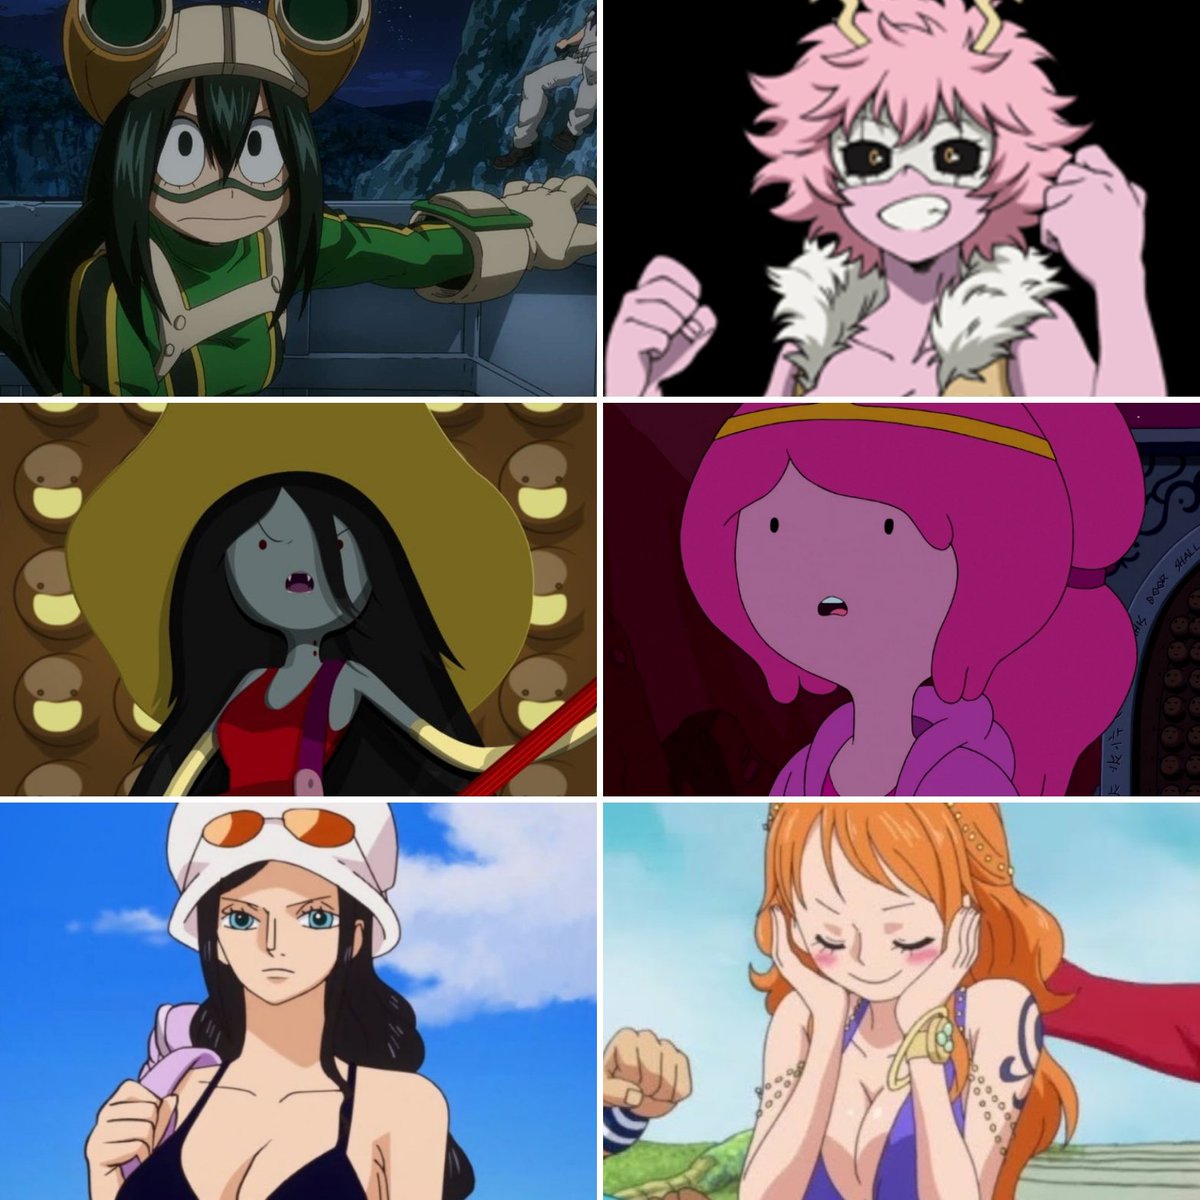 So I noticed yesterday that all the cartoon girls that I like seem to come in pairs that are opposites. 